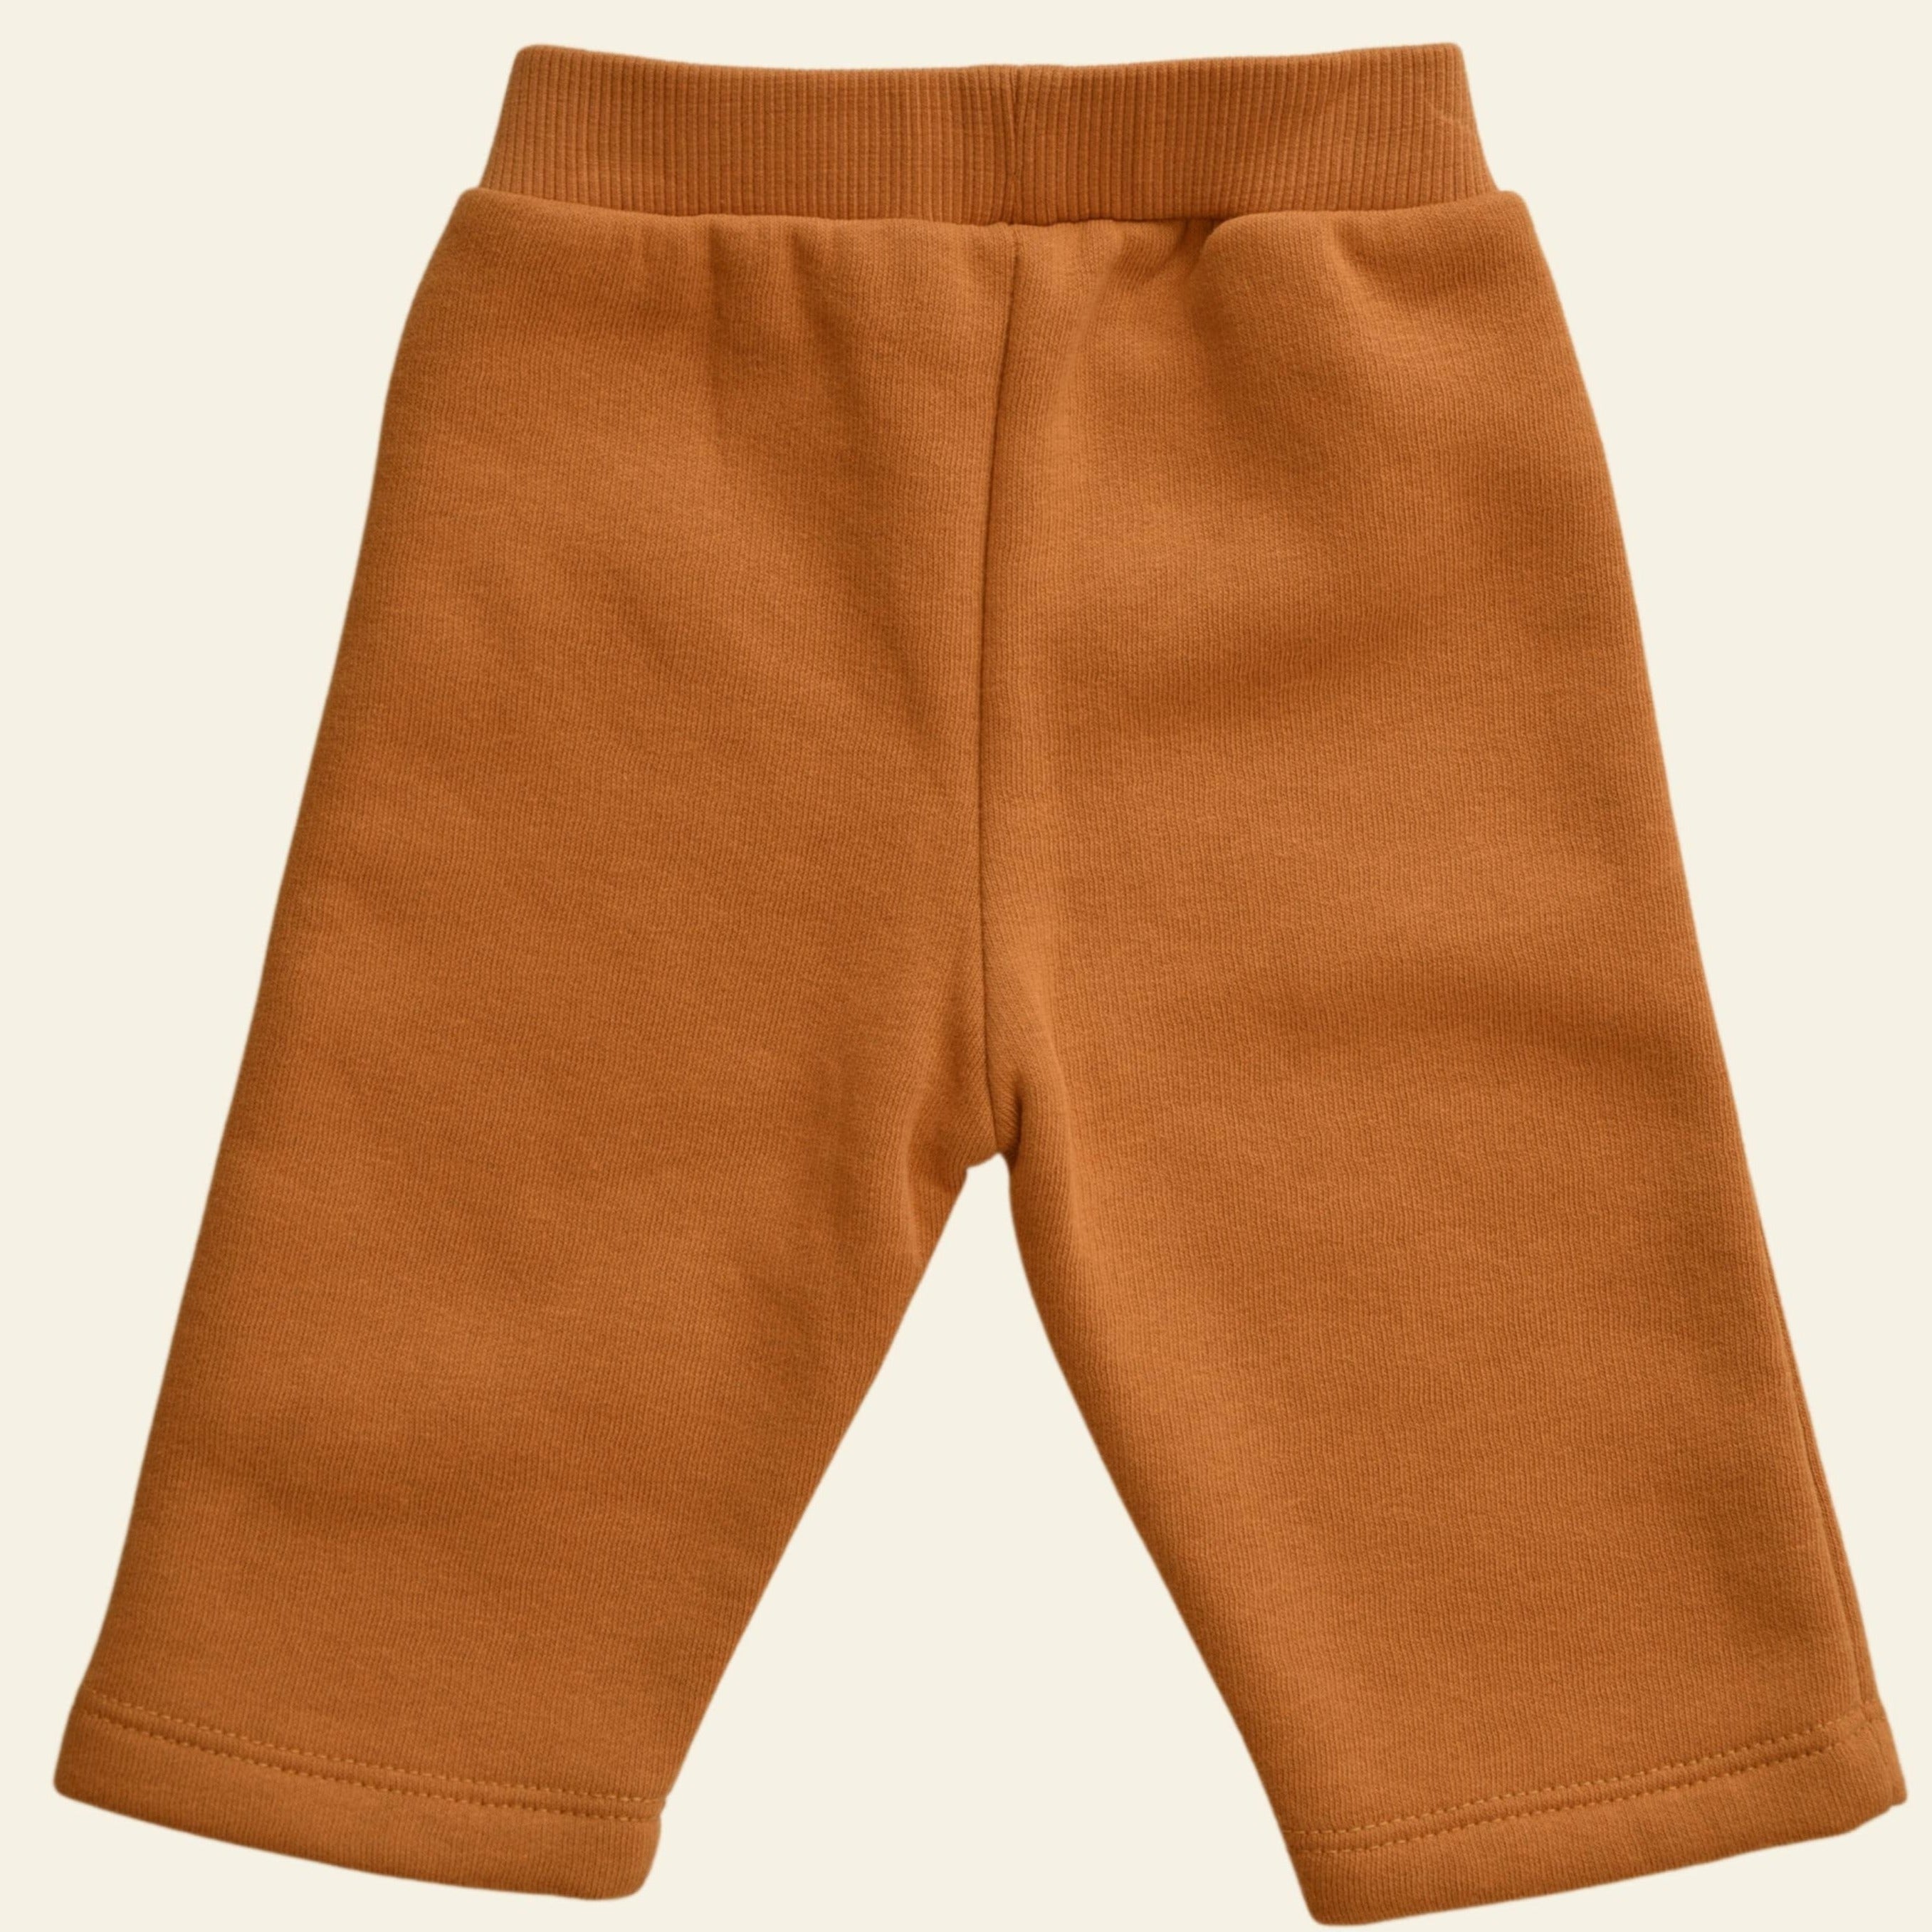 Eli & Nev / Cotton Baby Pants for Babies and Kids 1y - 5Y 3-4 Year